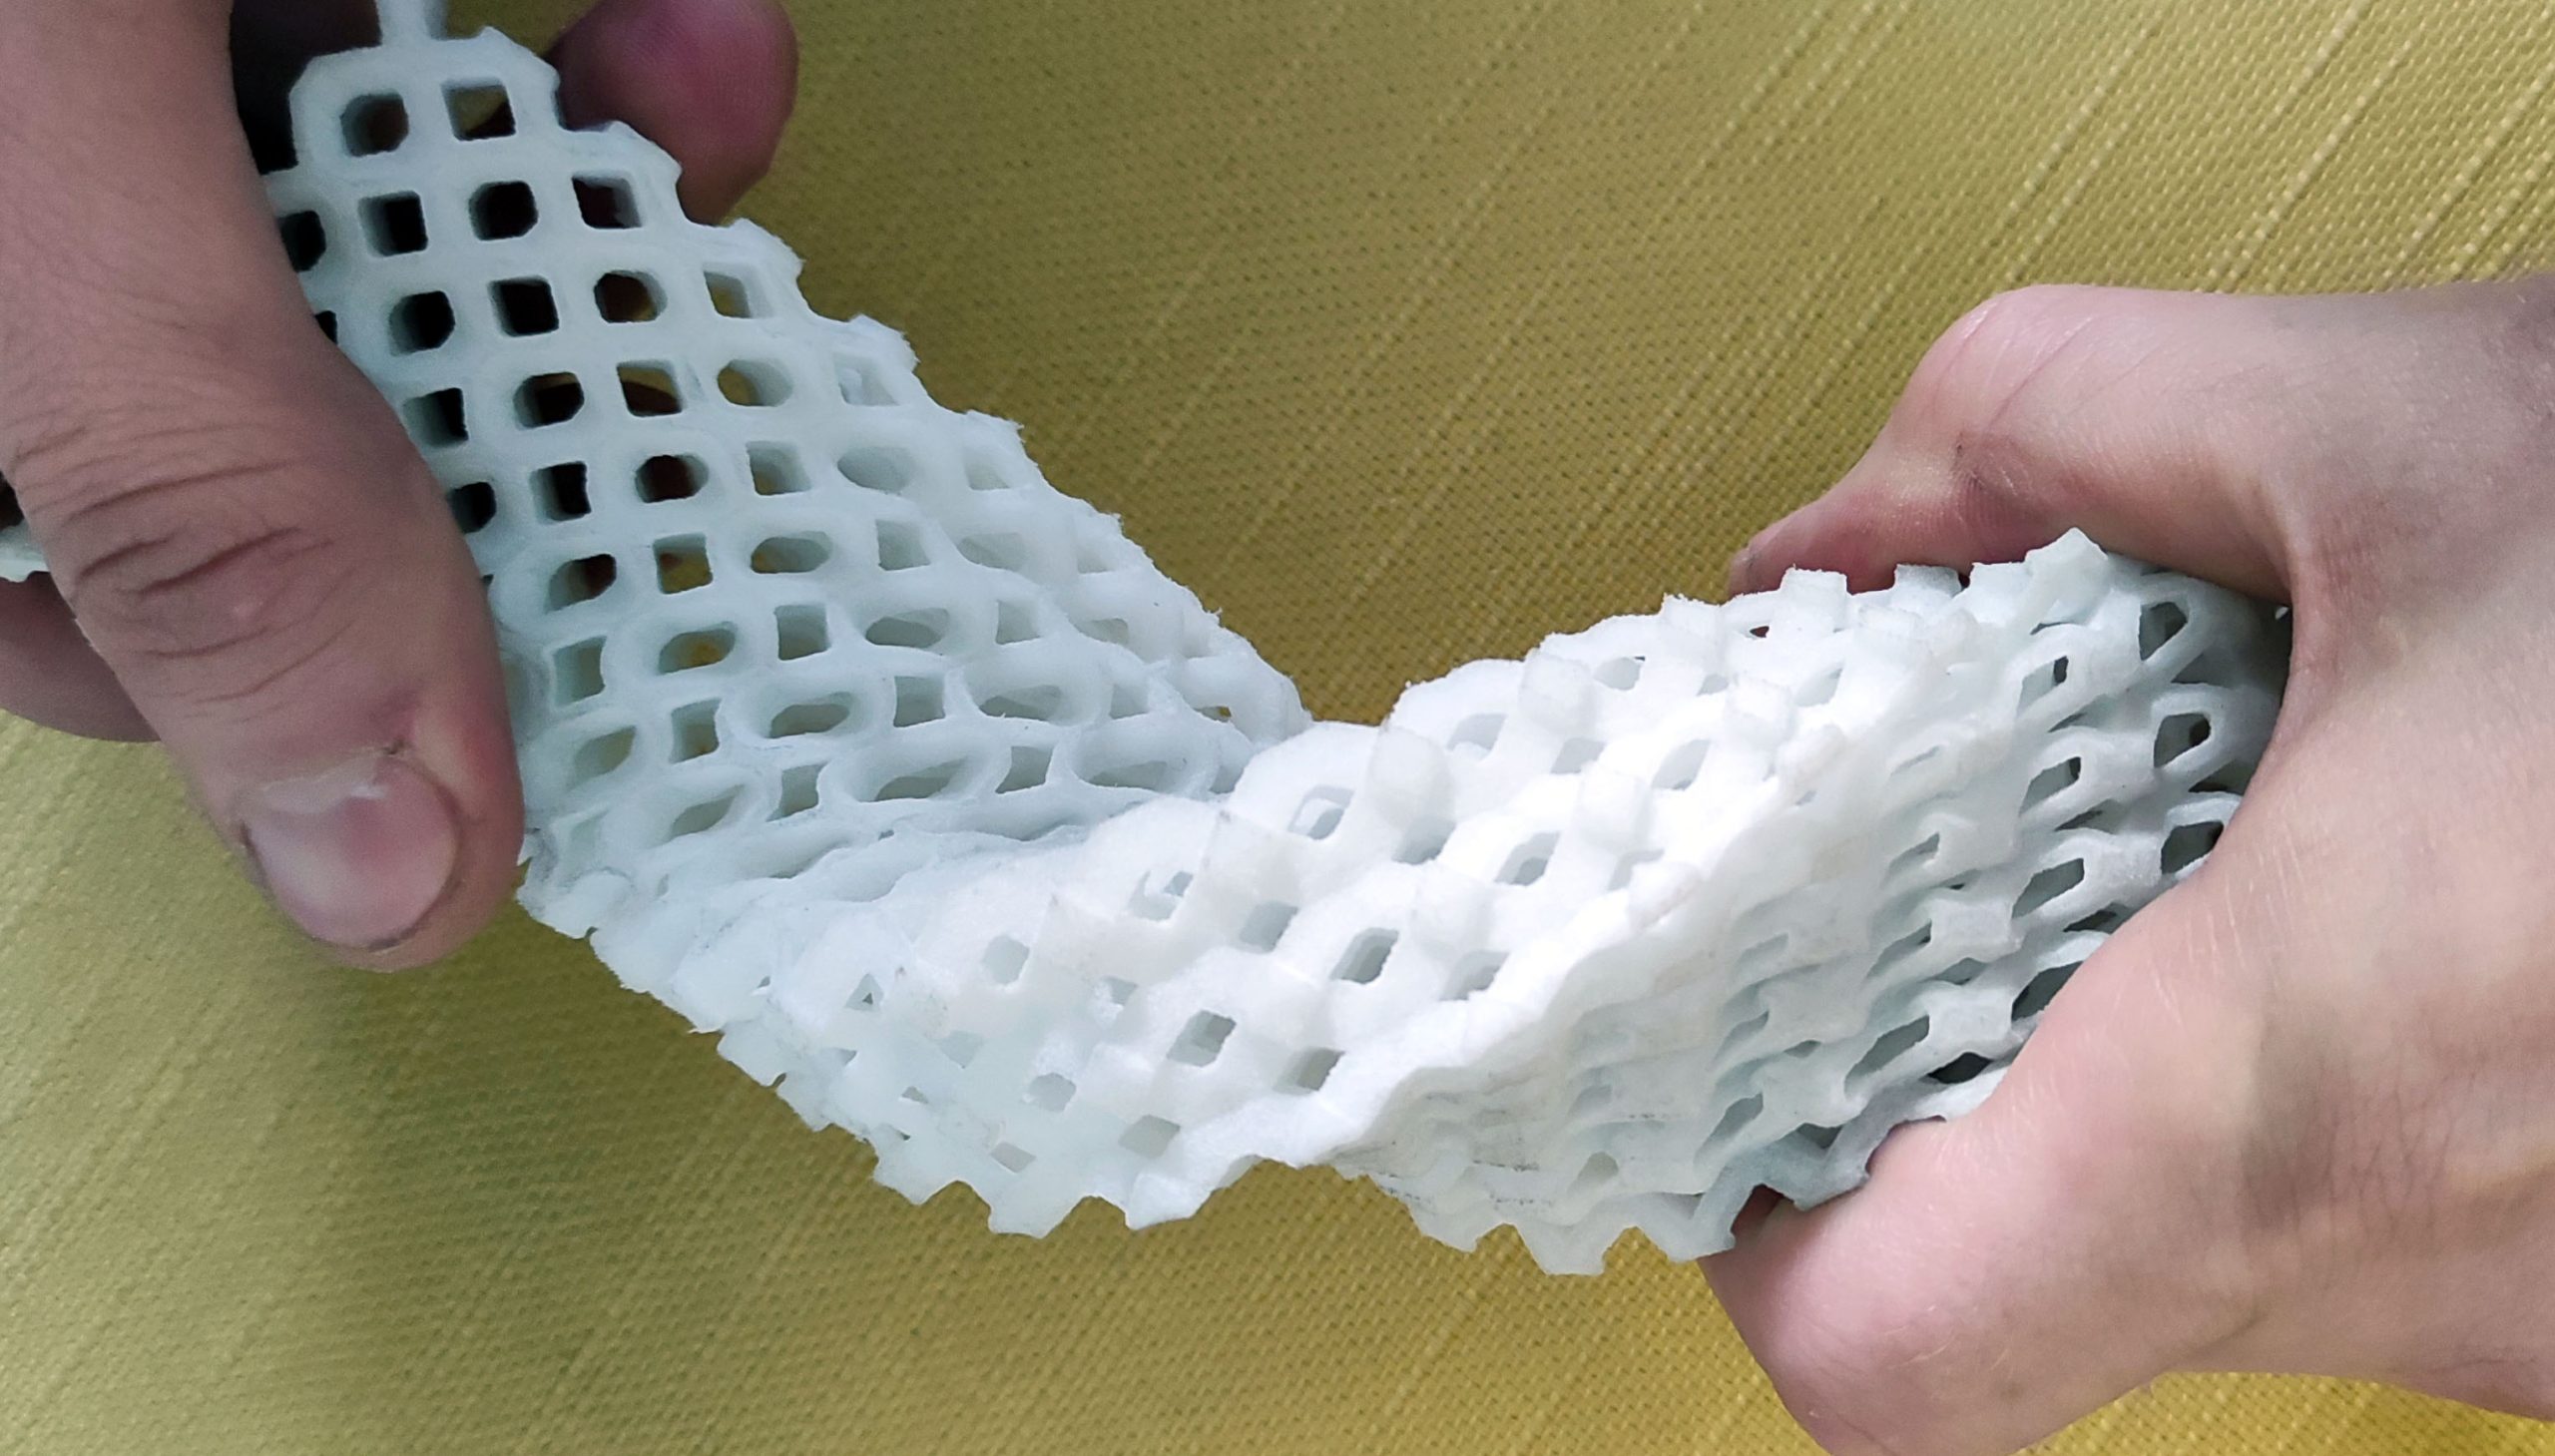 TPU rubber for 3D printed & Molded parts